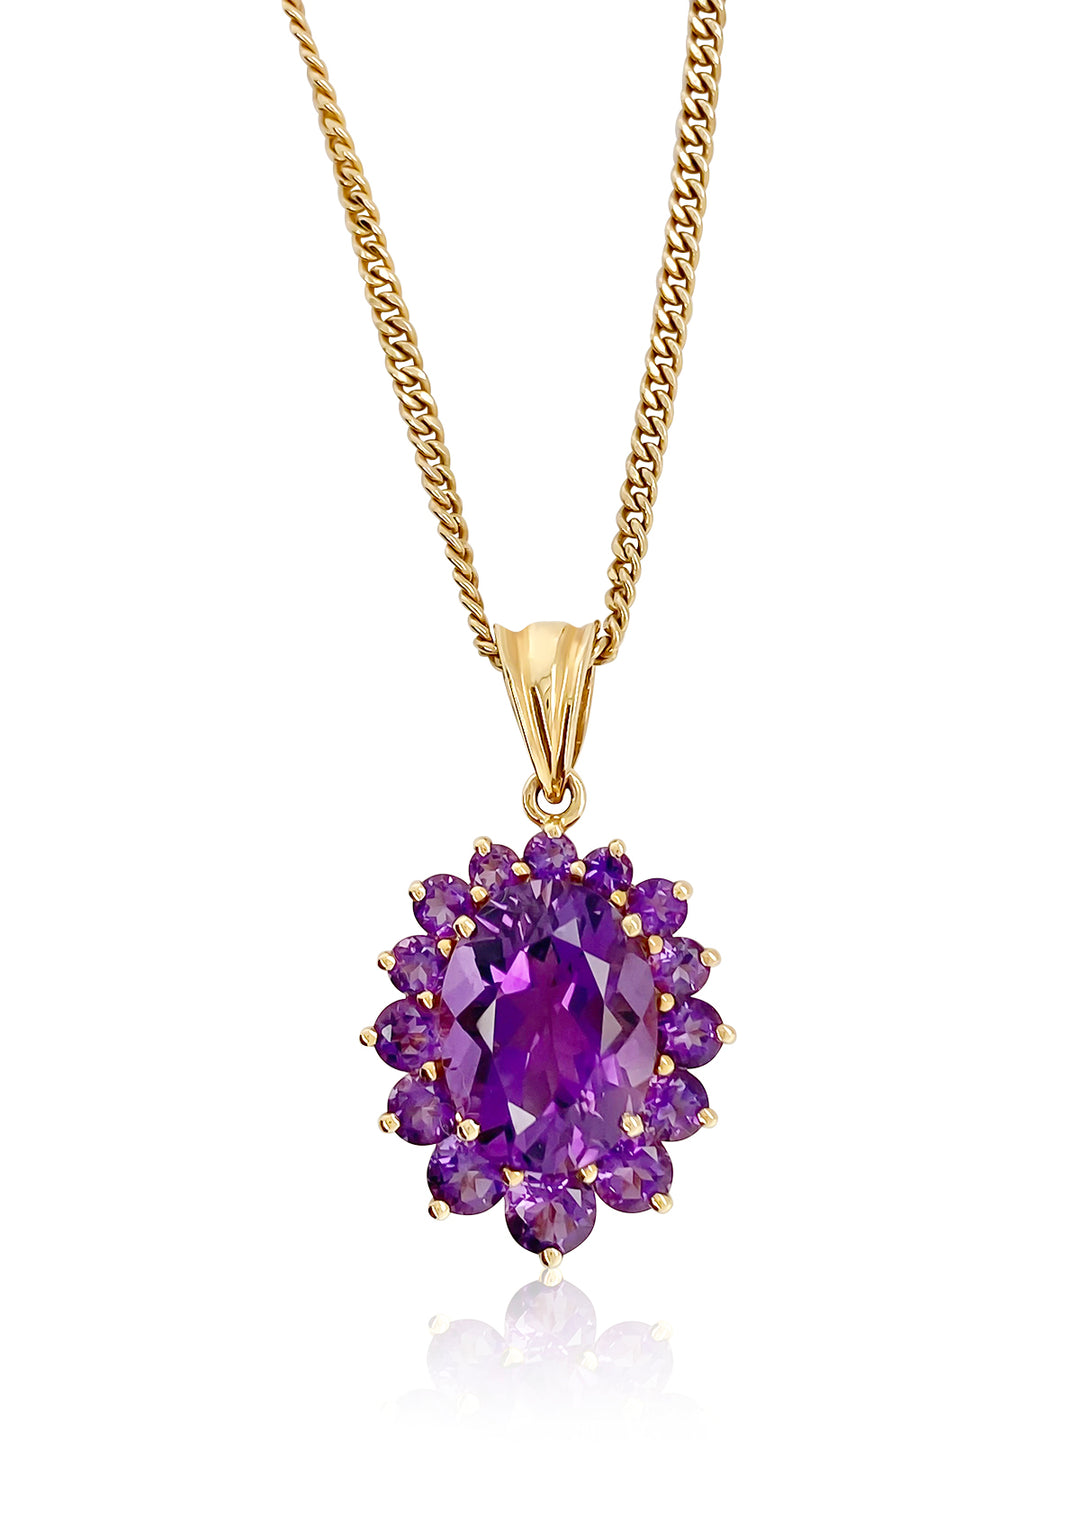 14K Yellow Gold Amethyst Cluster Necklace